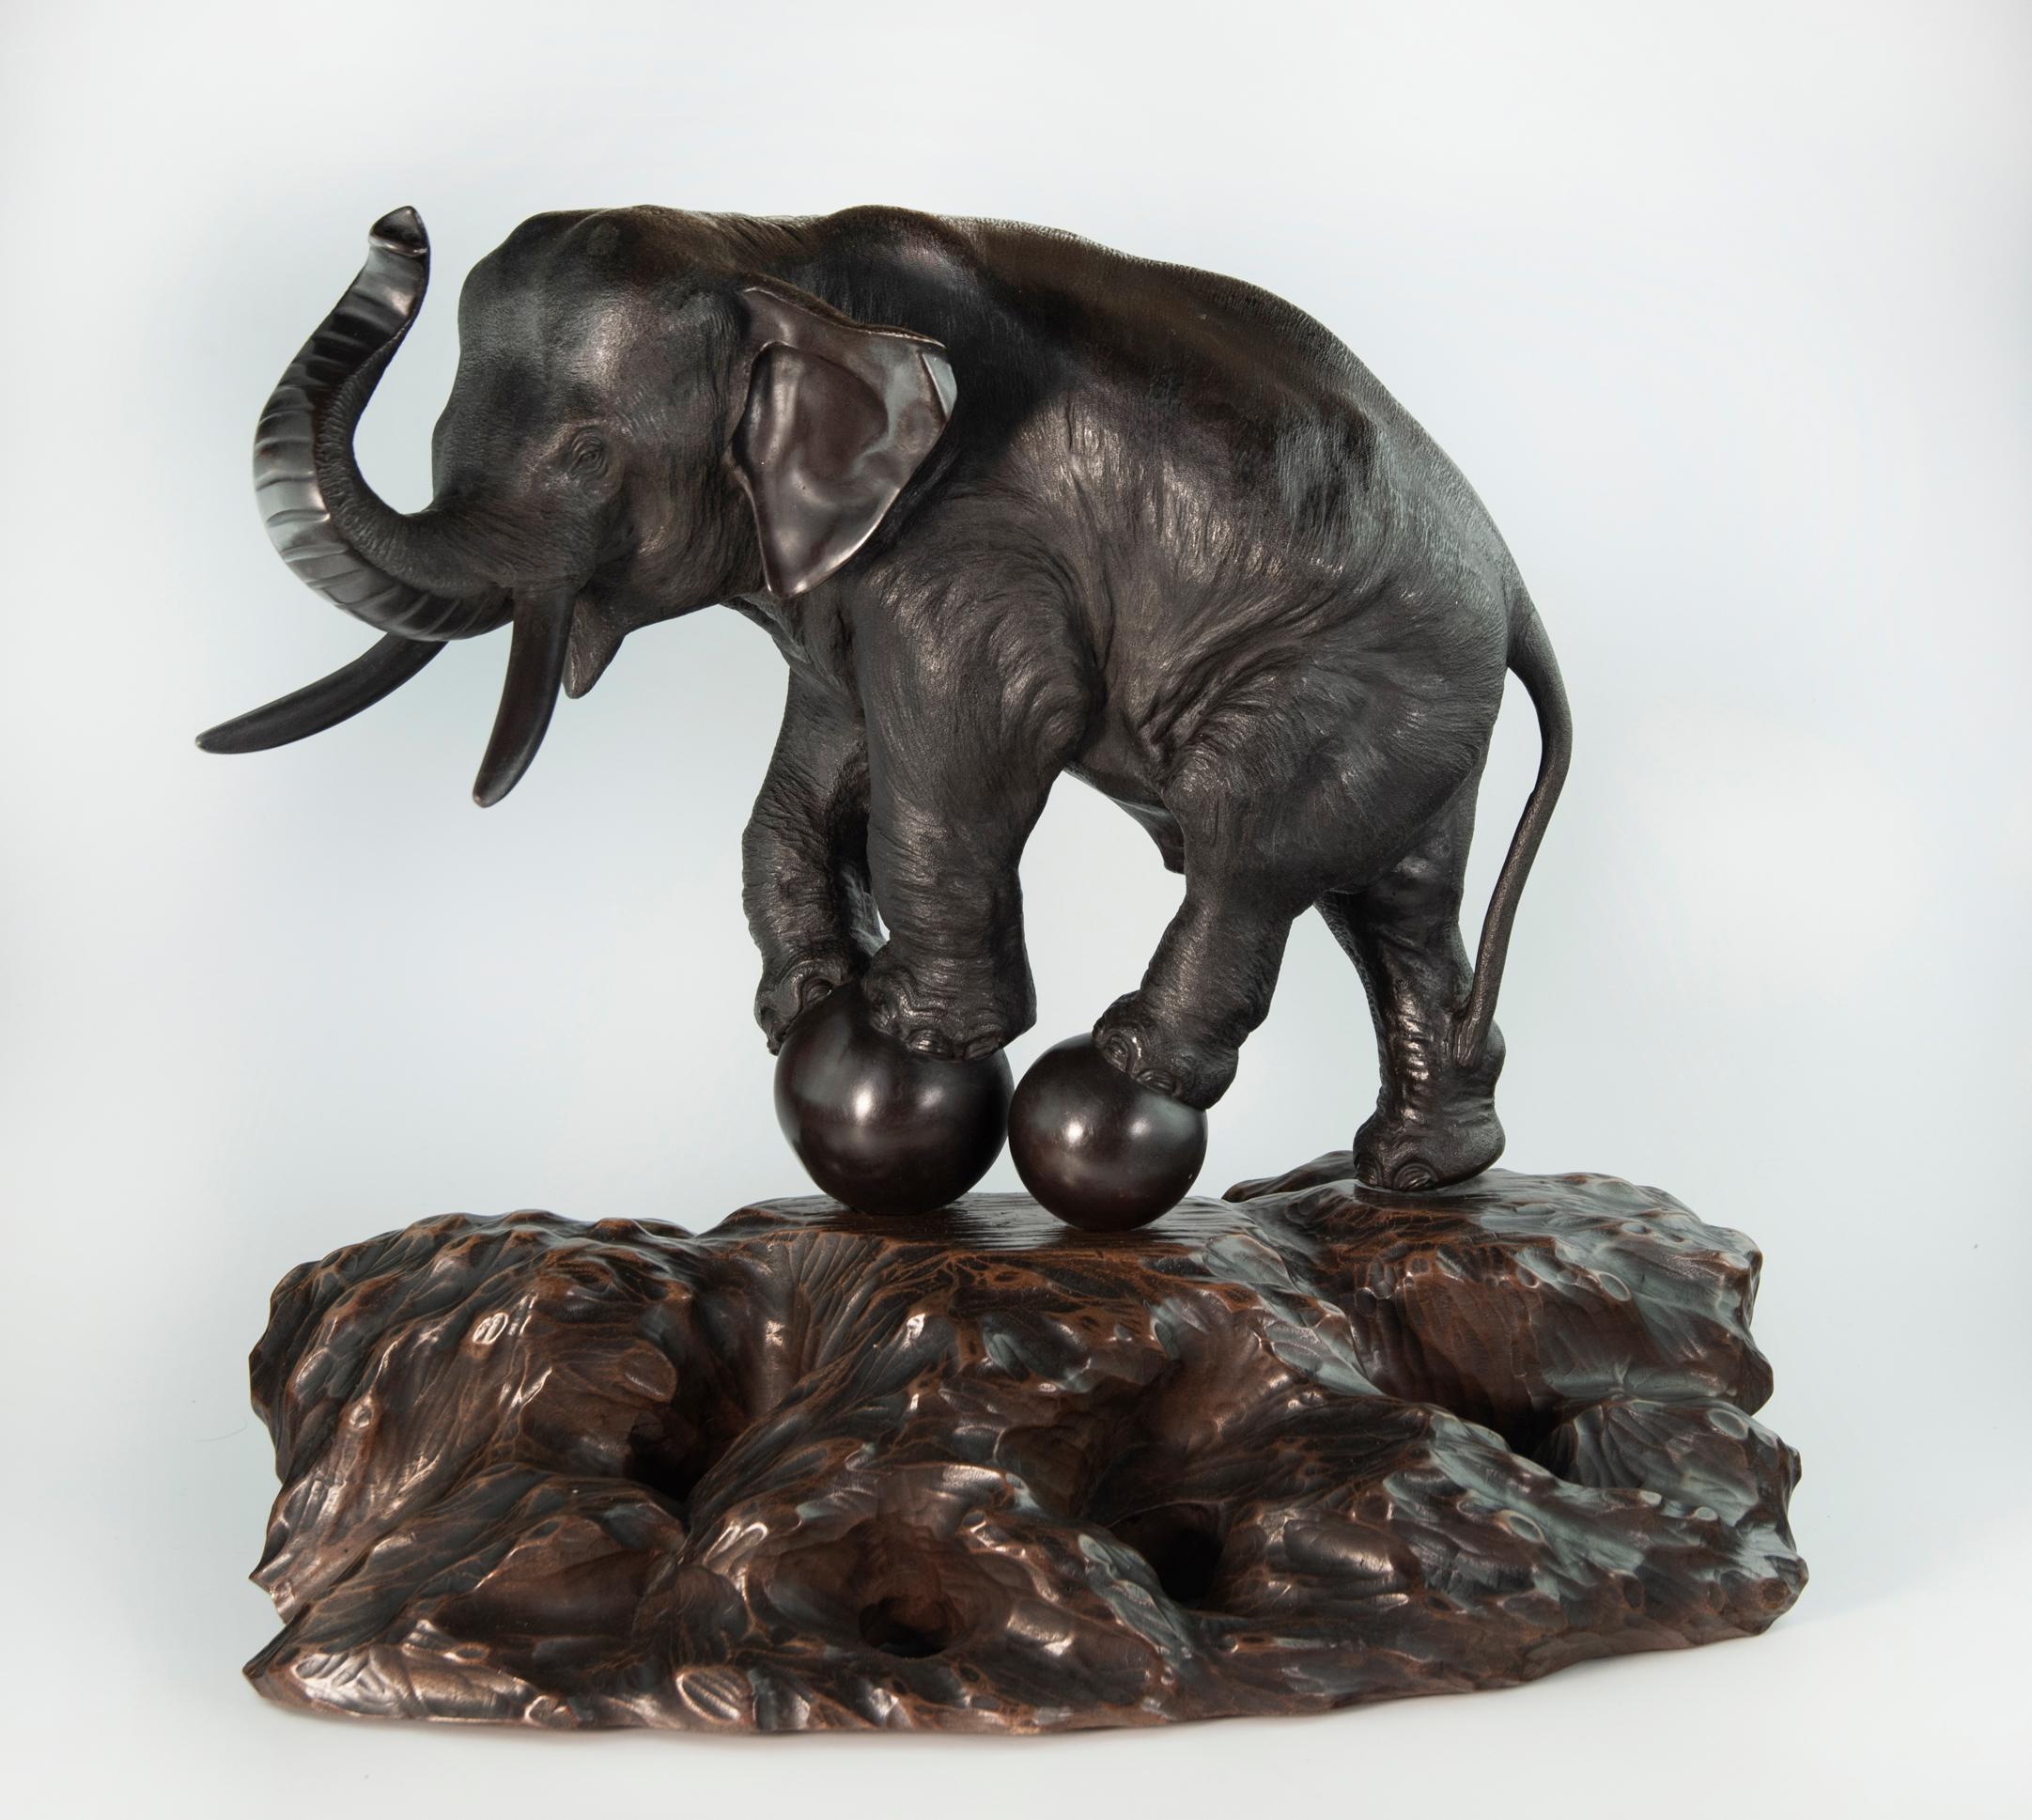 As part of our Japanese works of art collection we are delighted to offer this unusual Meiji Period 1868-1912 , study of a large elephant performing a balancing act upon two huge bronze spheres fitted with a bronze peg upon its original nicely